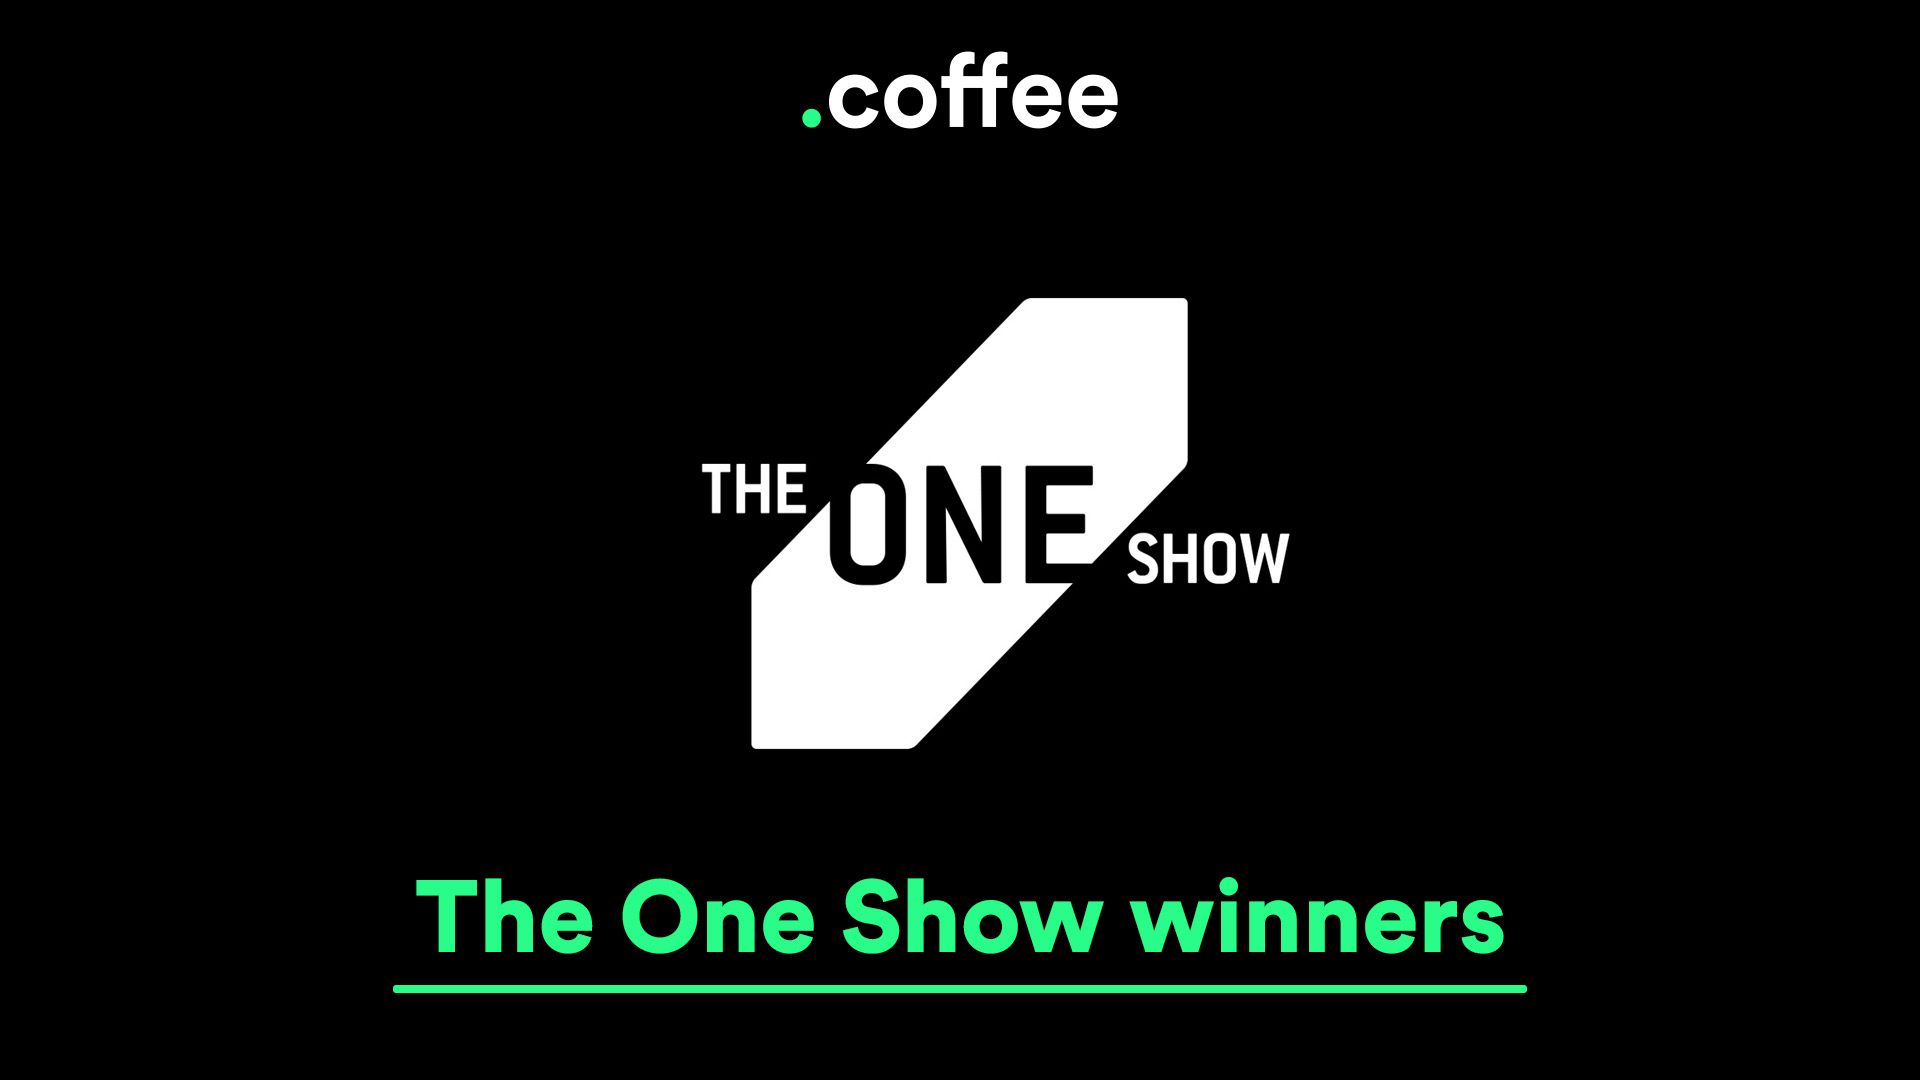 The One Show winners